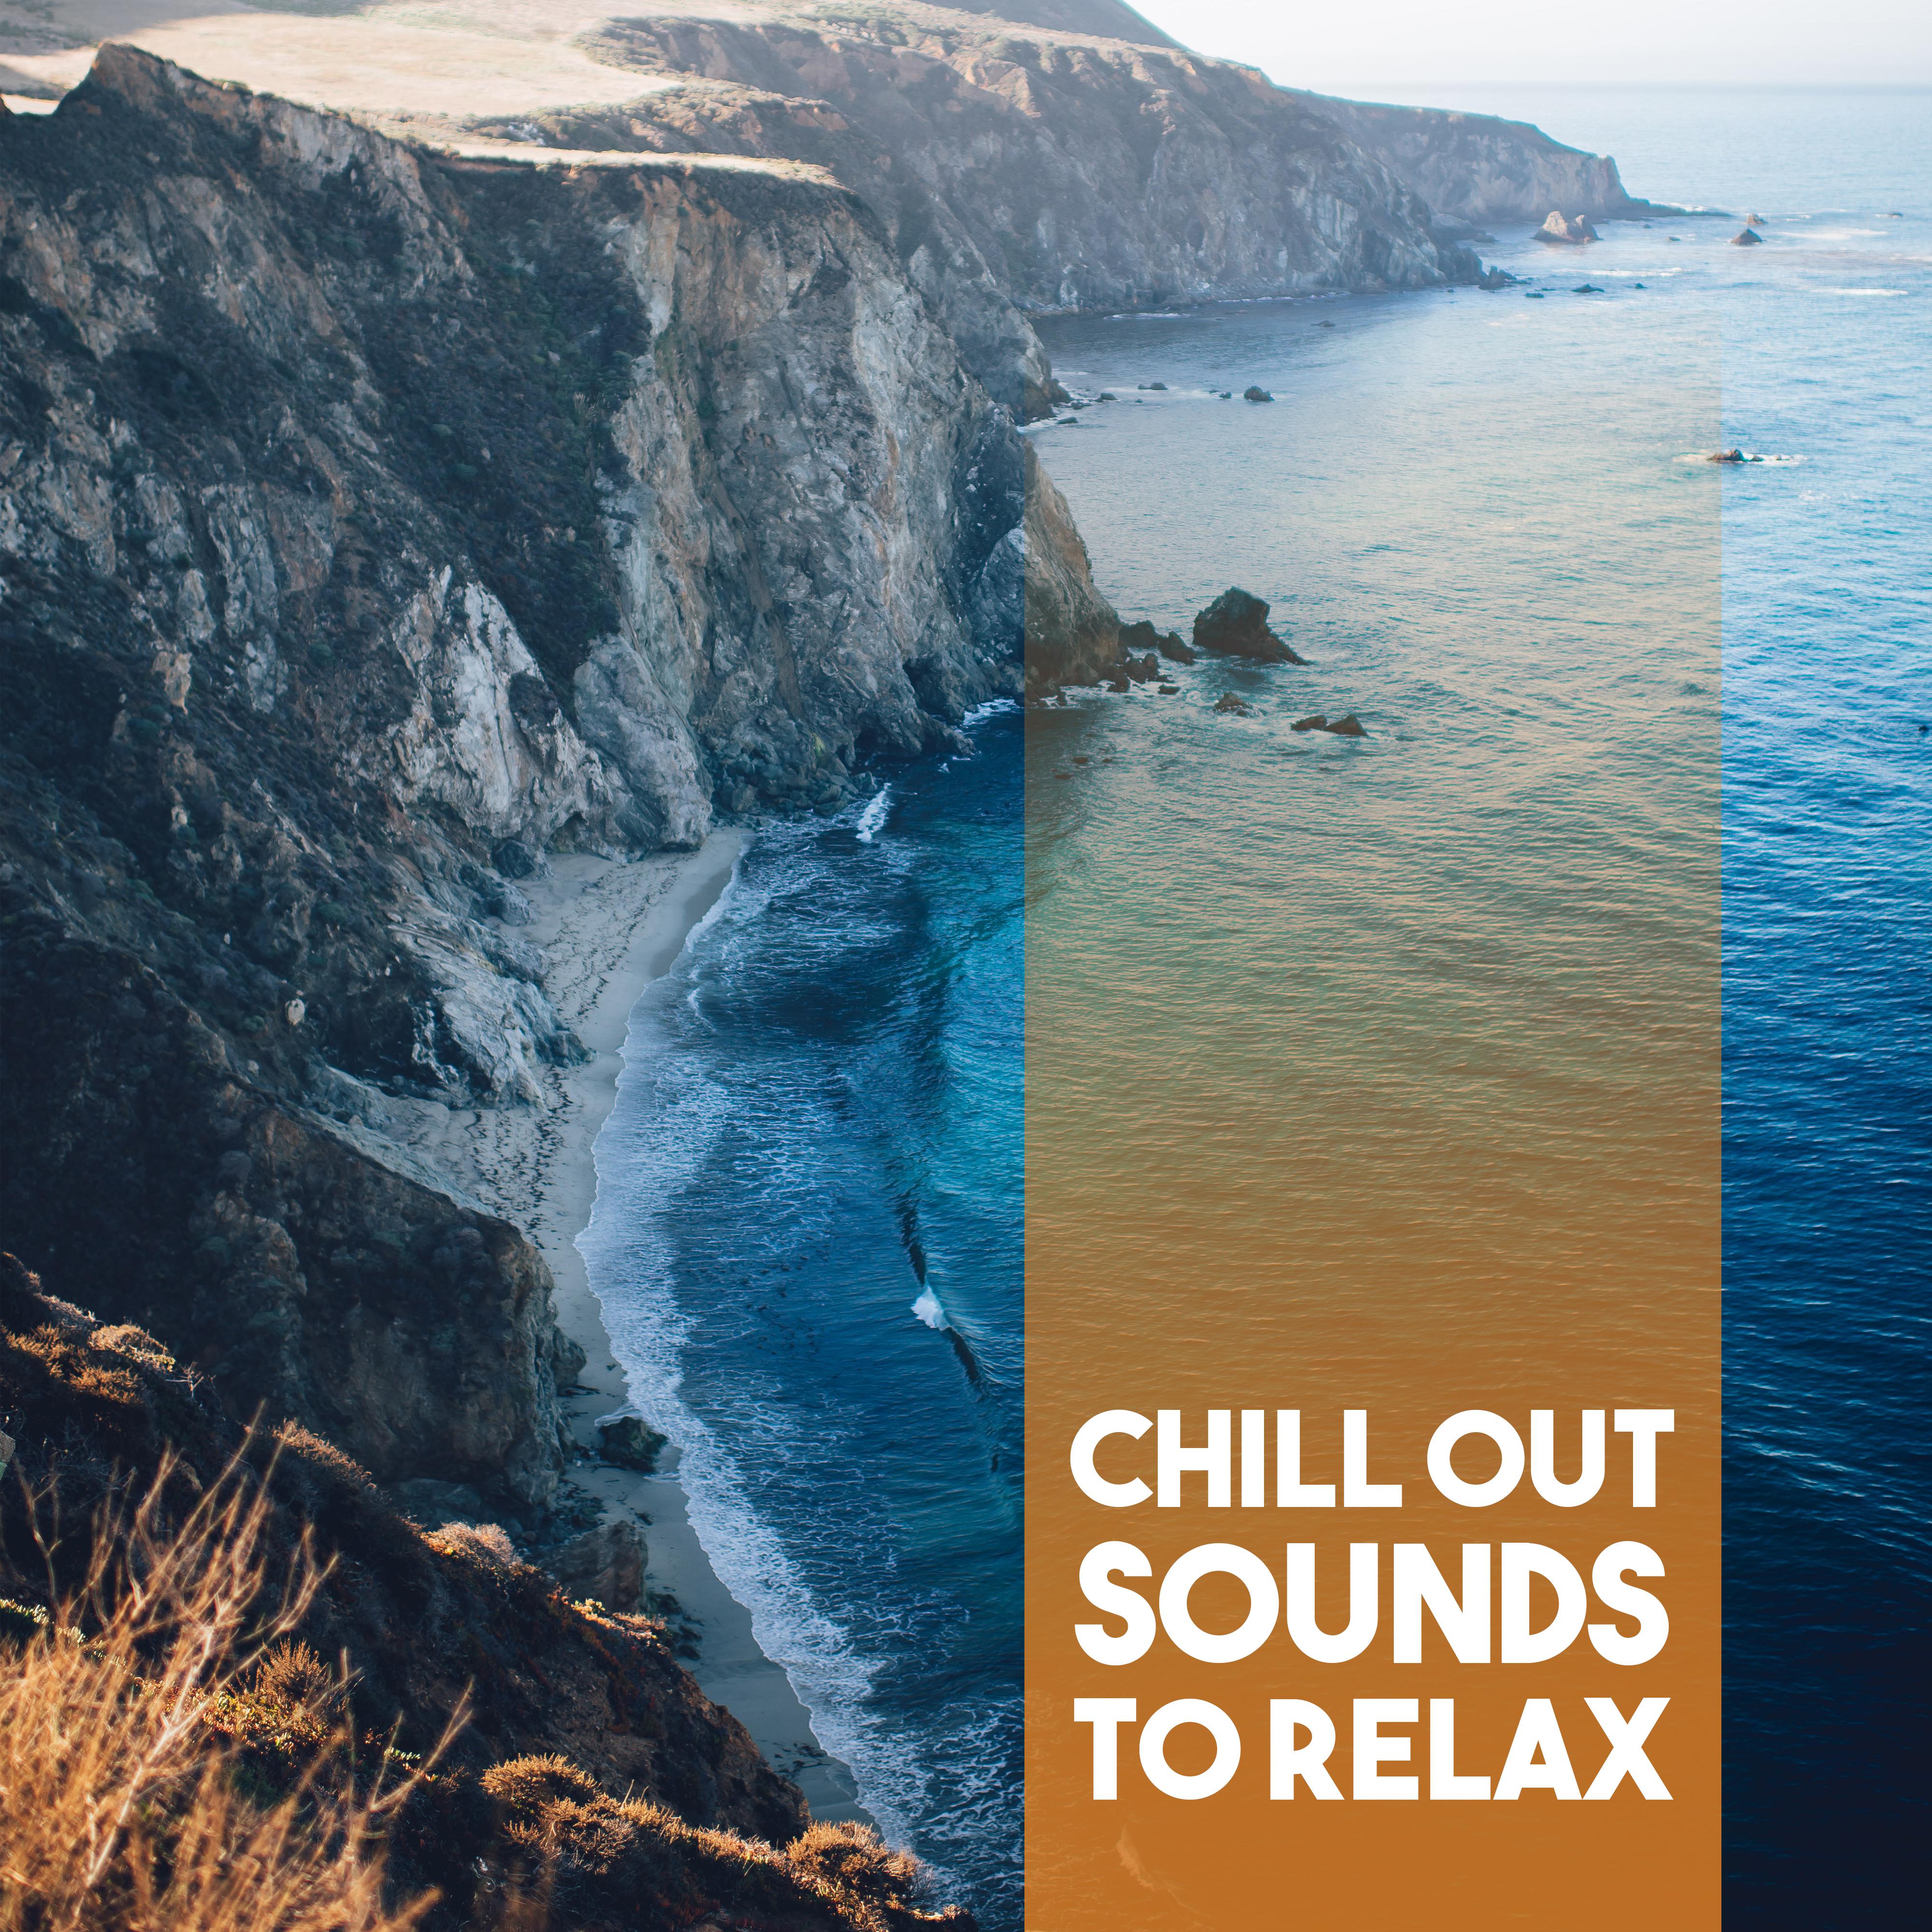 Chill Out Sounds to Relax  Calming Music, Chillout  Relax, Summer Time Sounds, Beach Lounge